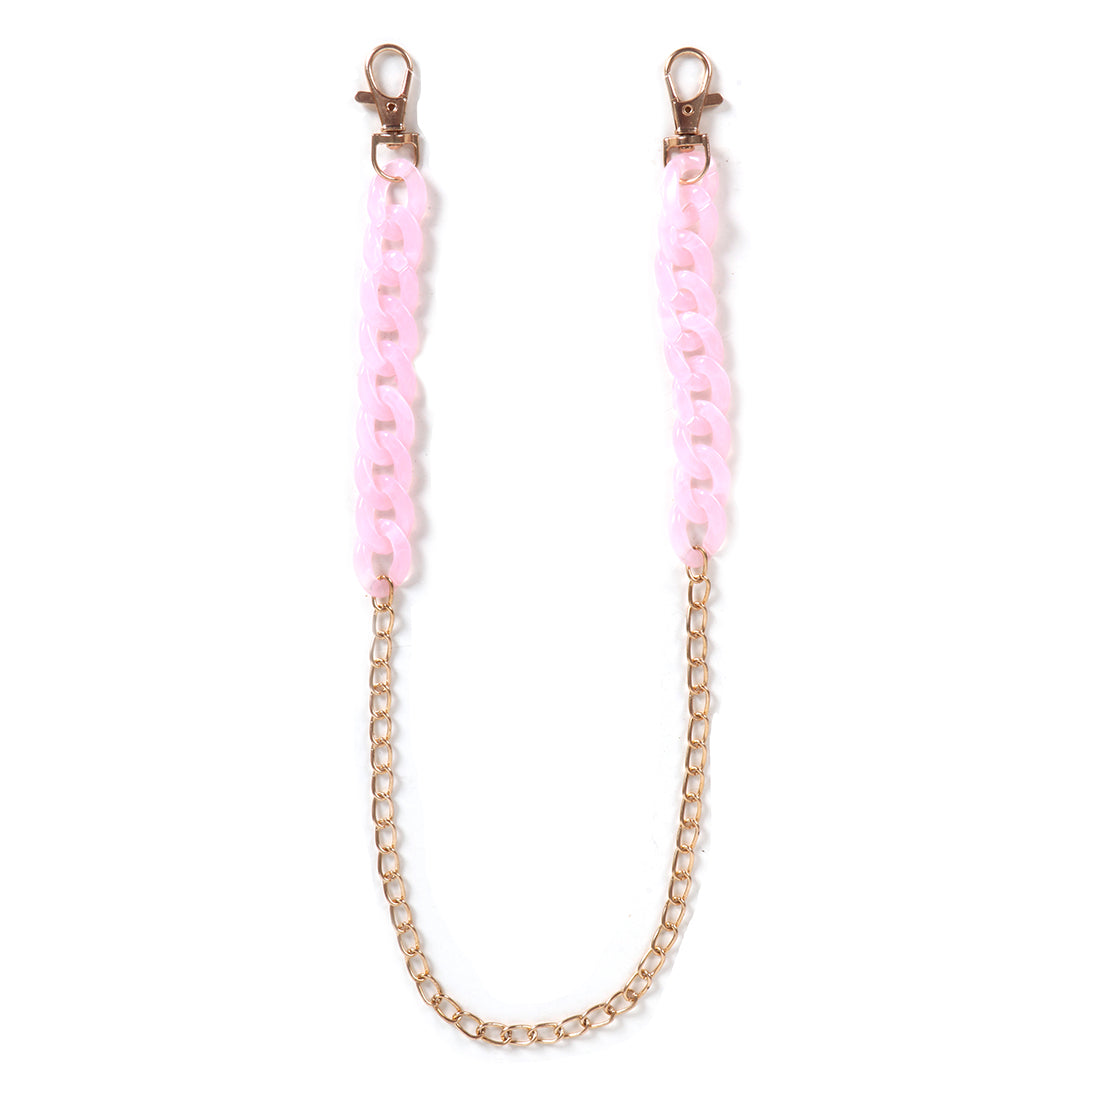 METALLIC GOLD-TONED CHAIN-LINK MARBLE PINK ACRYLIC MASK CHAIN OR SUNGLASS CHAIN